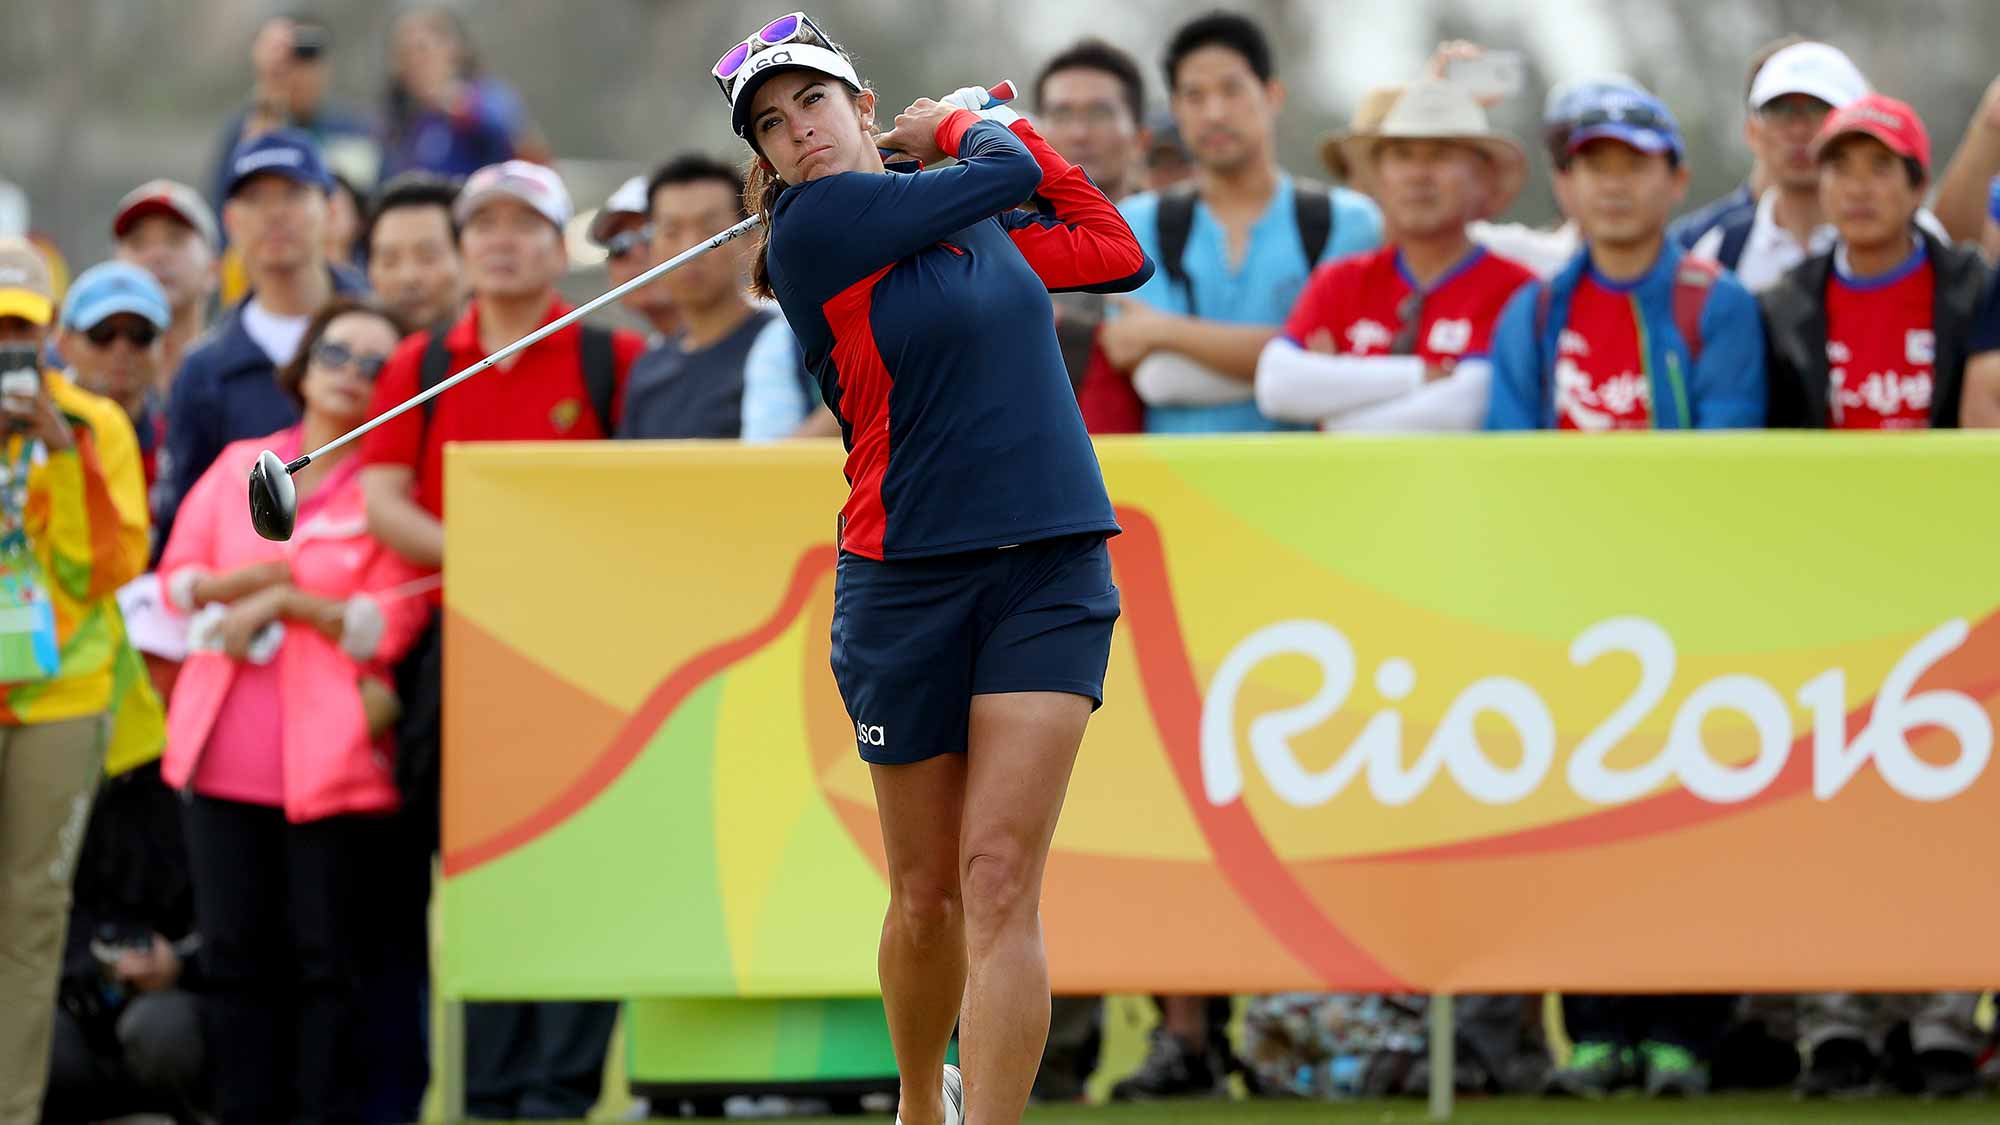 Gerina Piller of the United States plays her shot from the first tee during the Women's Golf Final on Day 15 of the Rio 2016 Olympic Games at the Olympic Golf Course